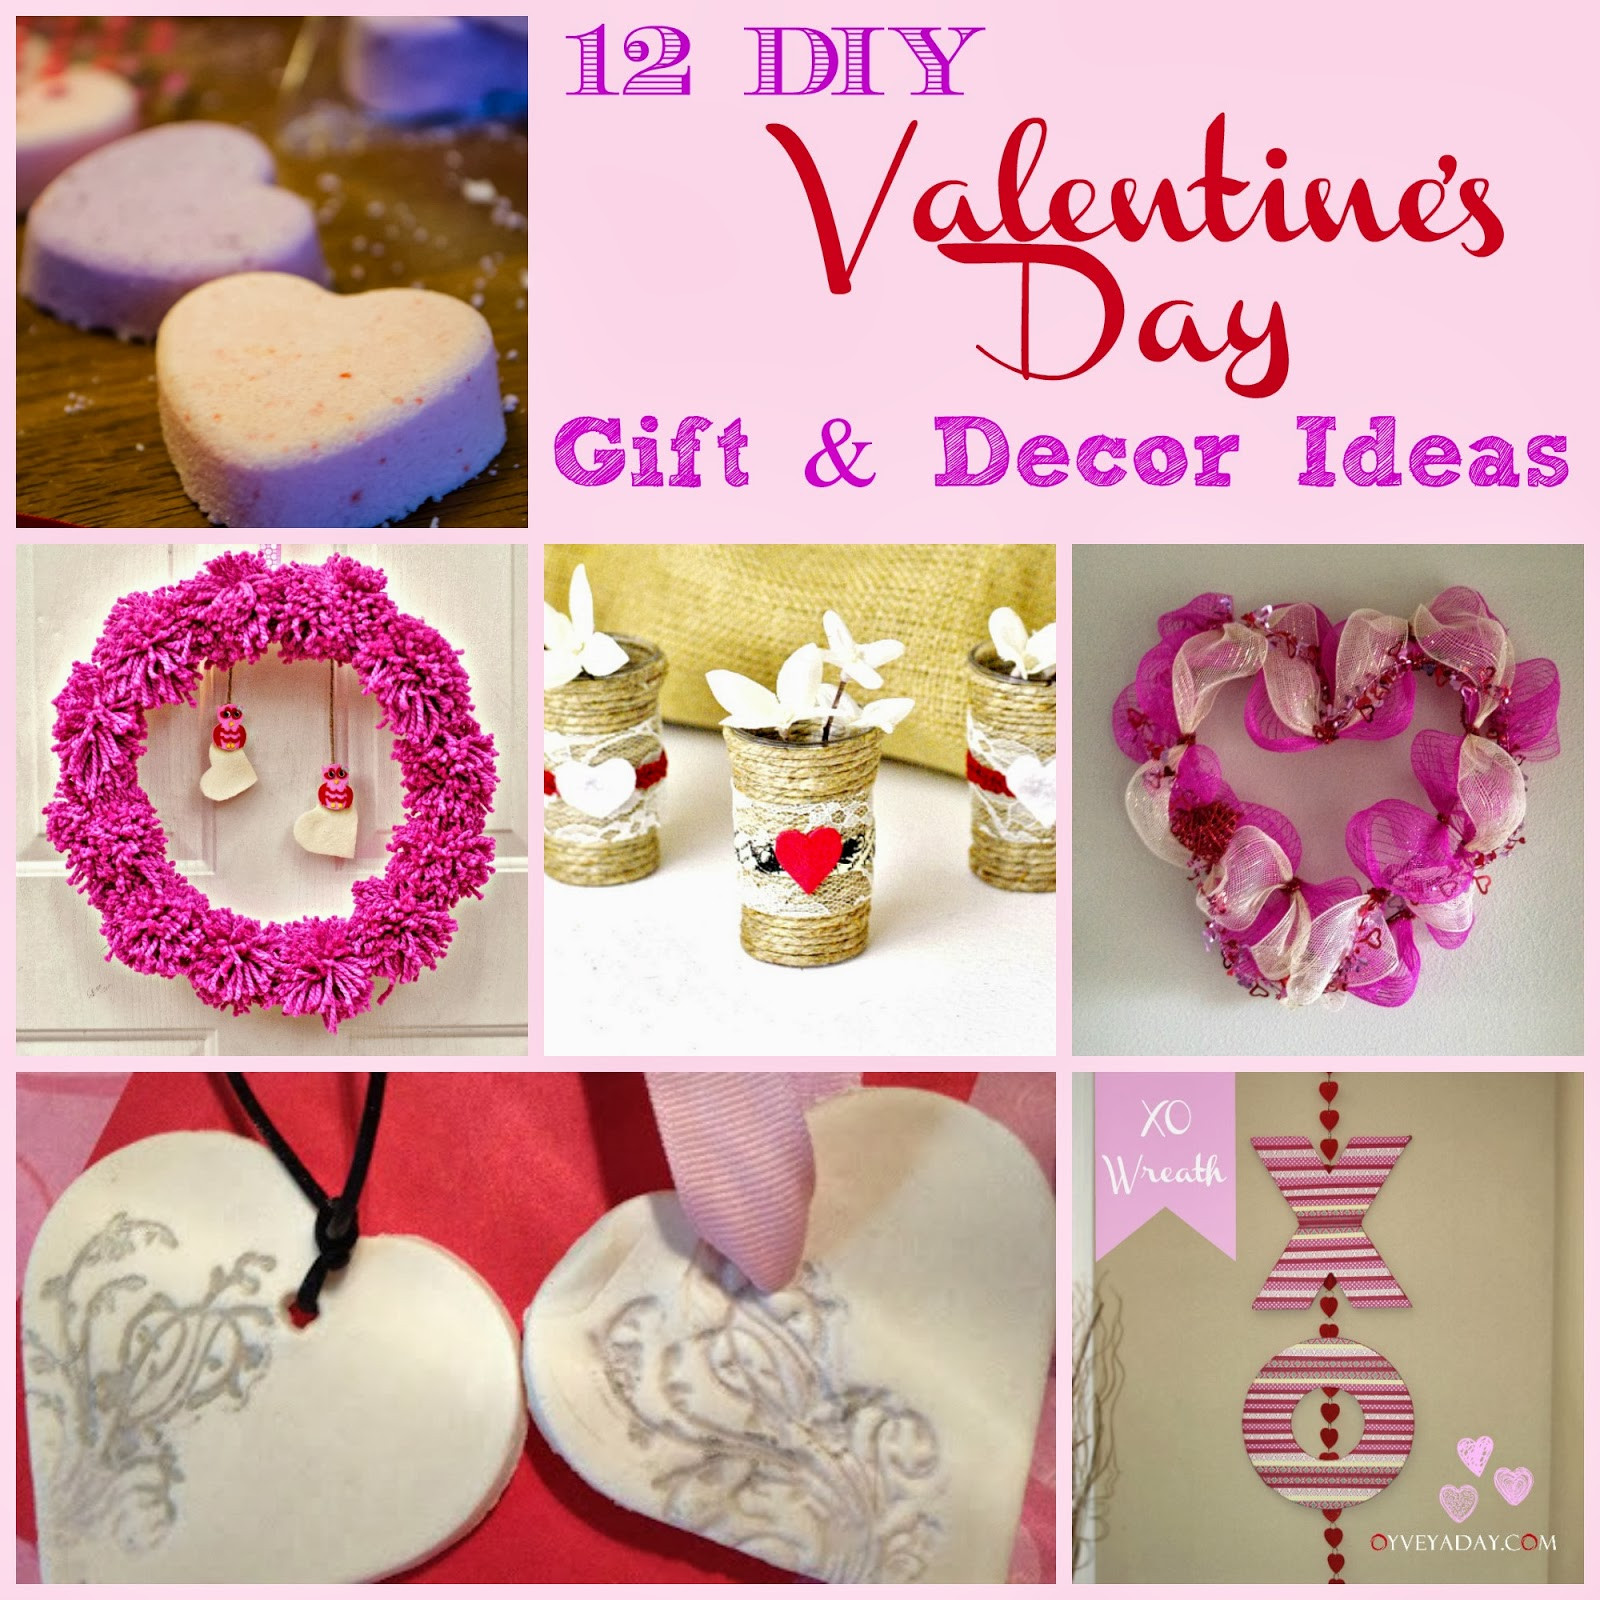 Valentines Day Present Ideas
 12 DIY Valentine s Day Gift & Decor Ideas Outnumbered 3 to 1